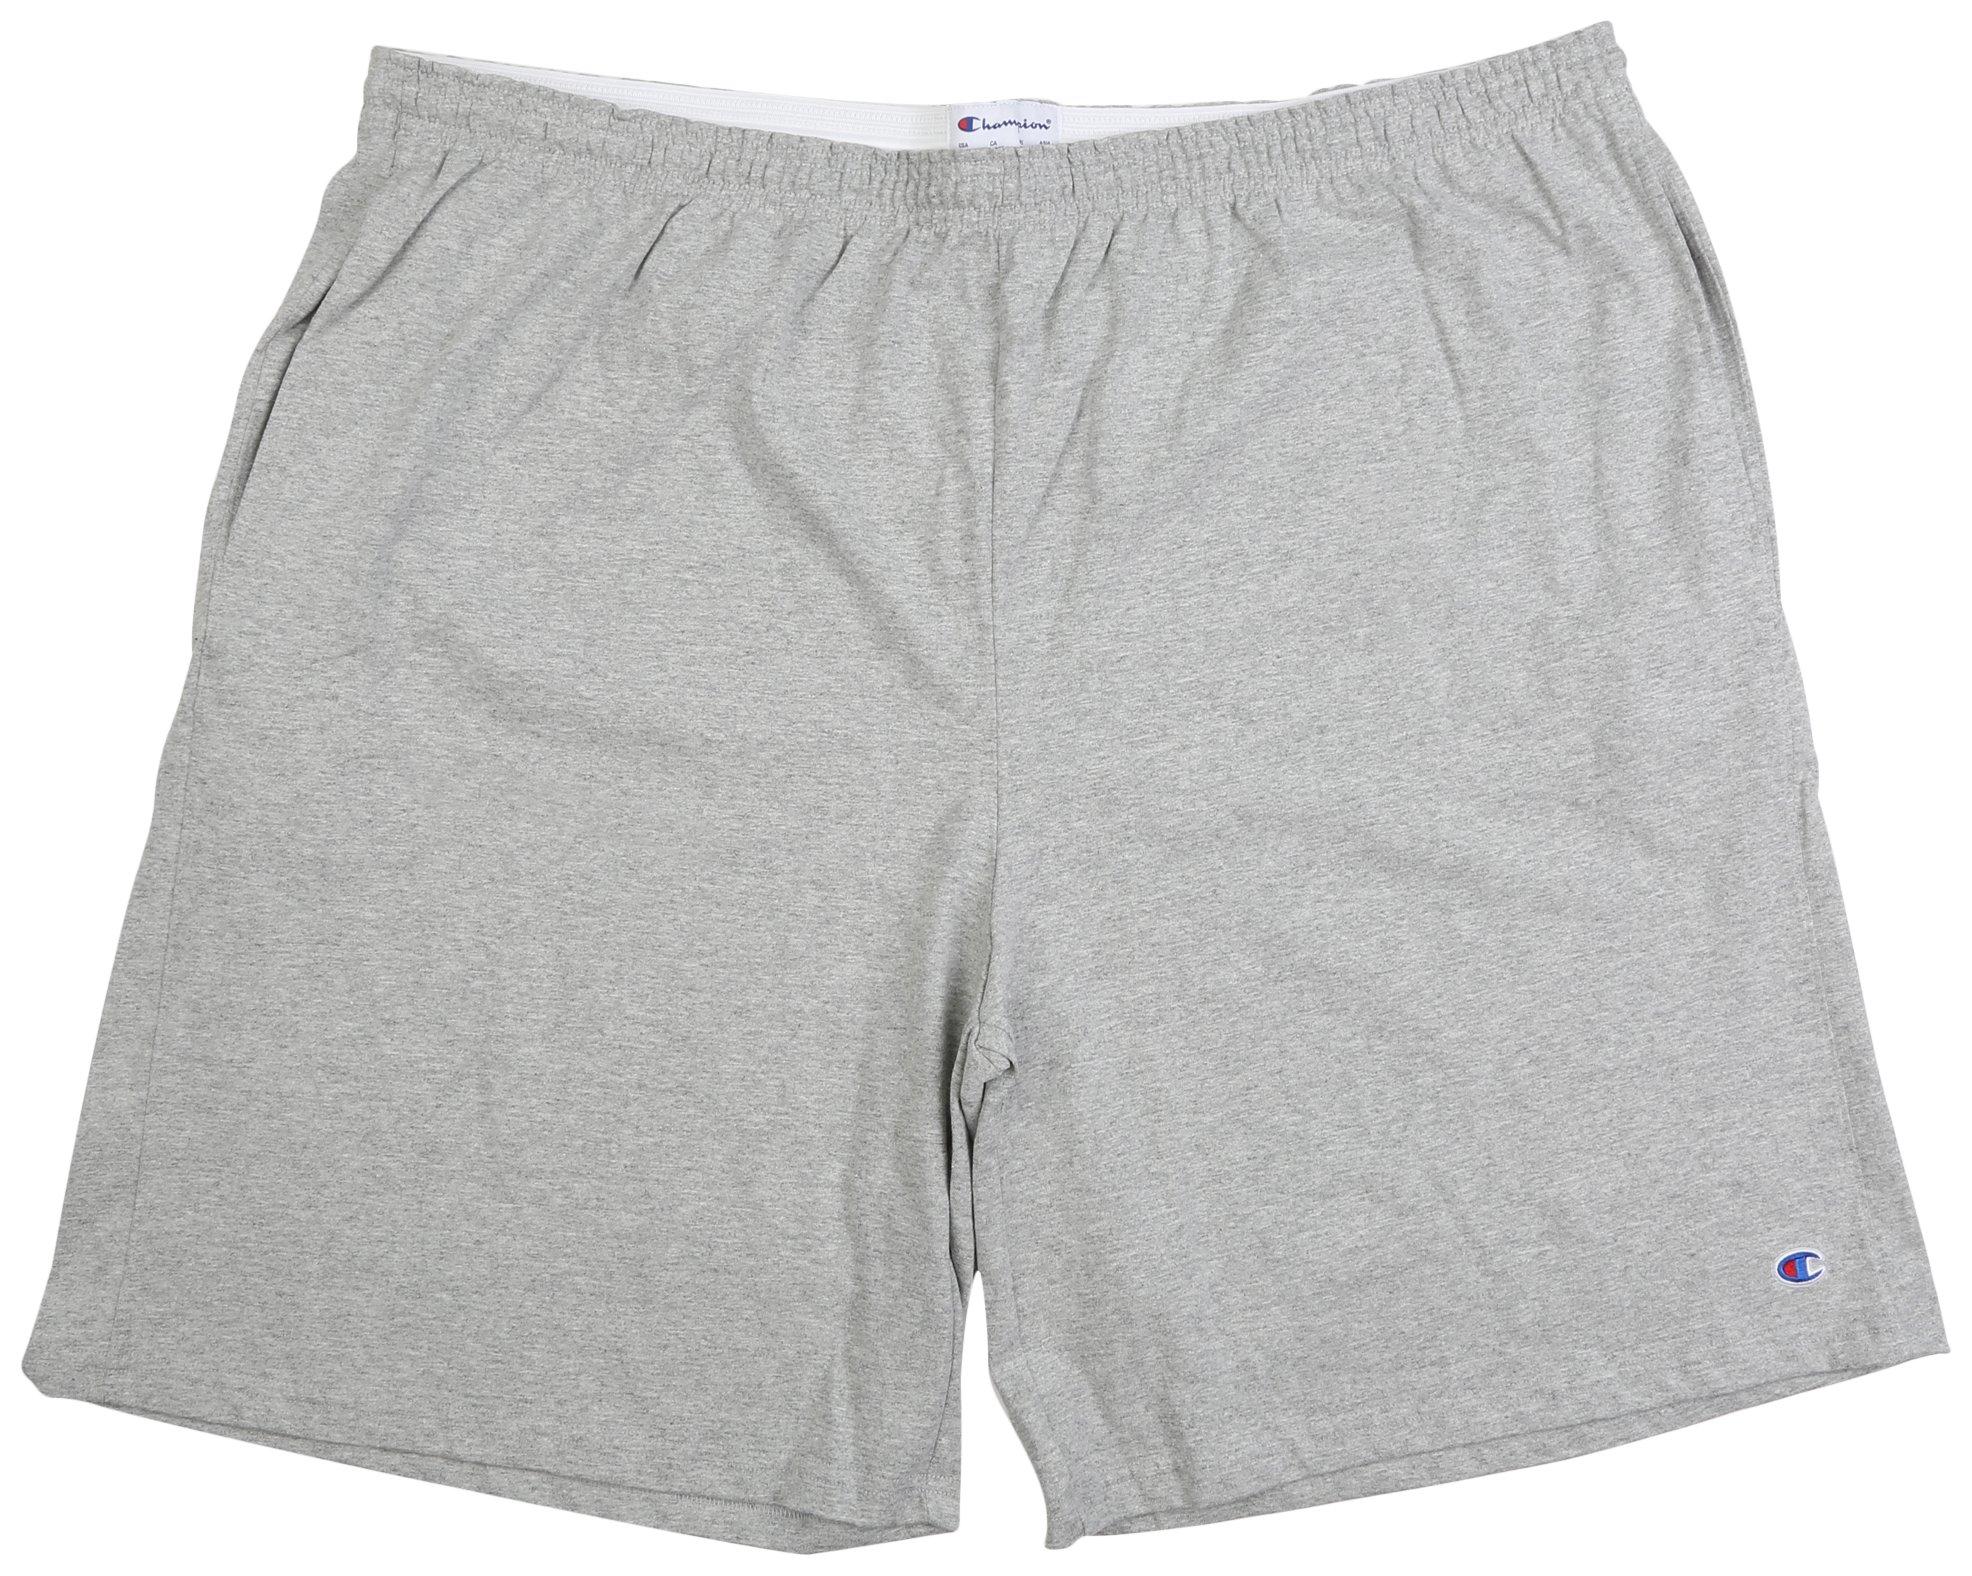 Mens Big & Tall Heather Cotton Polyester Shorts